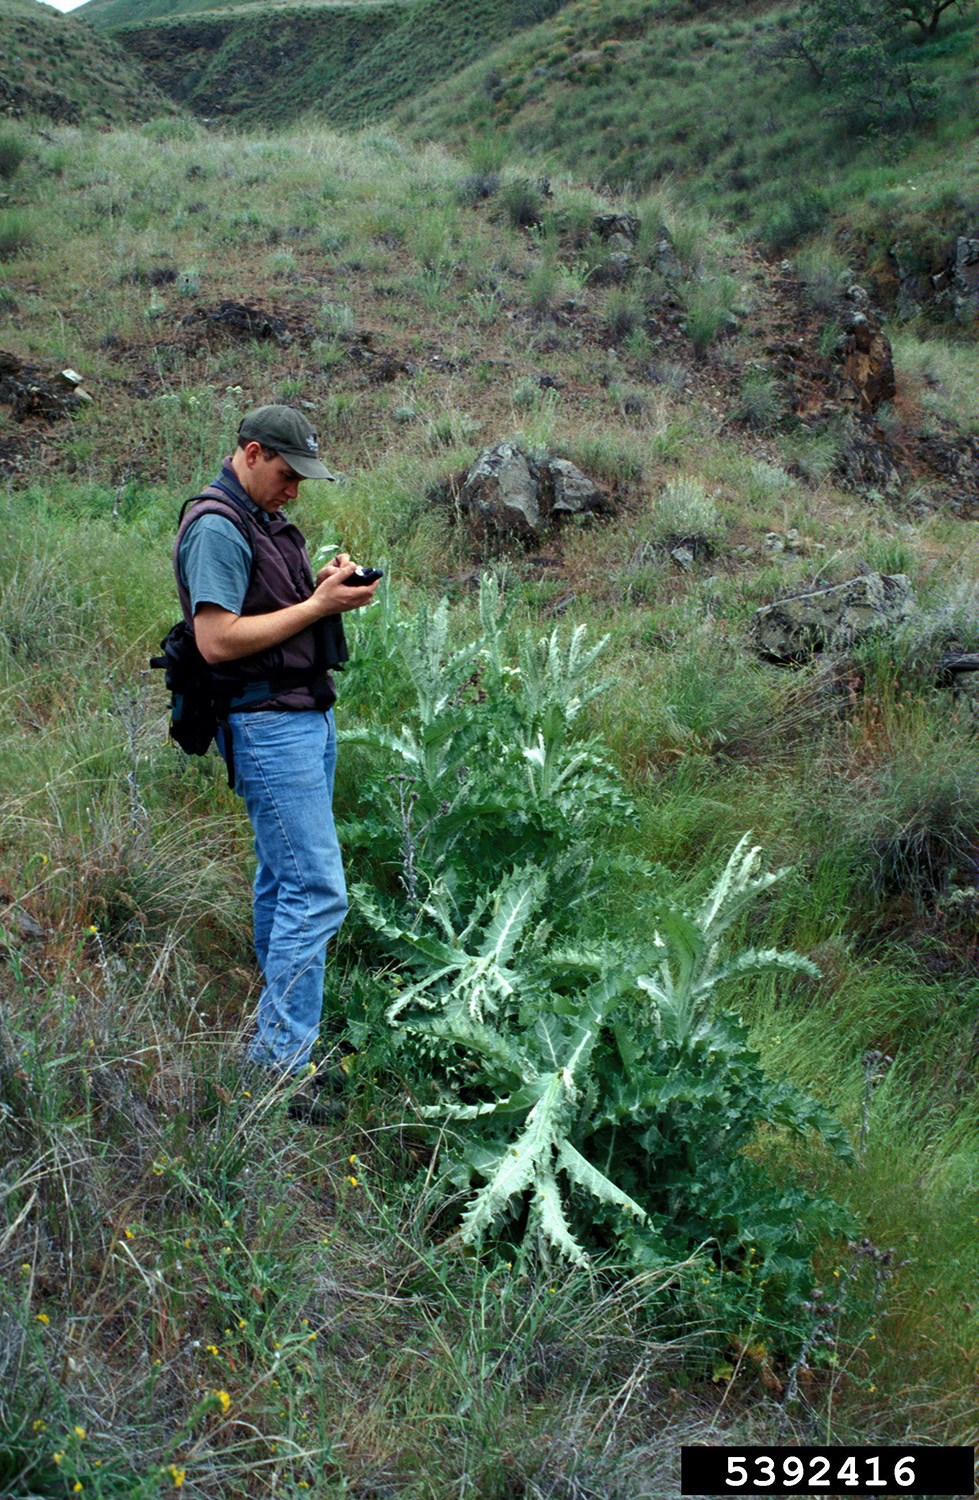 The height of a scotch thistle is compared next to a grown man.